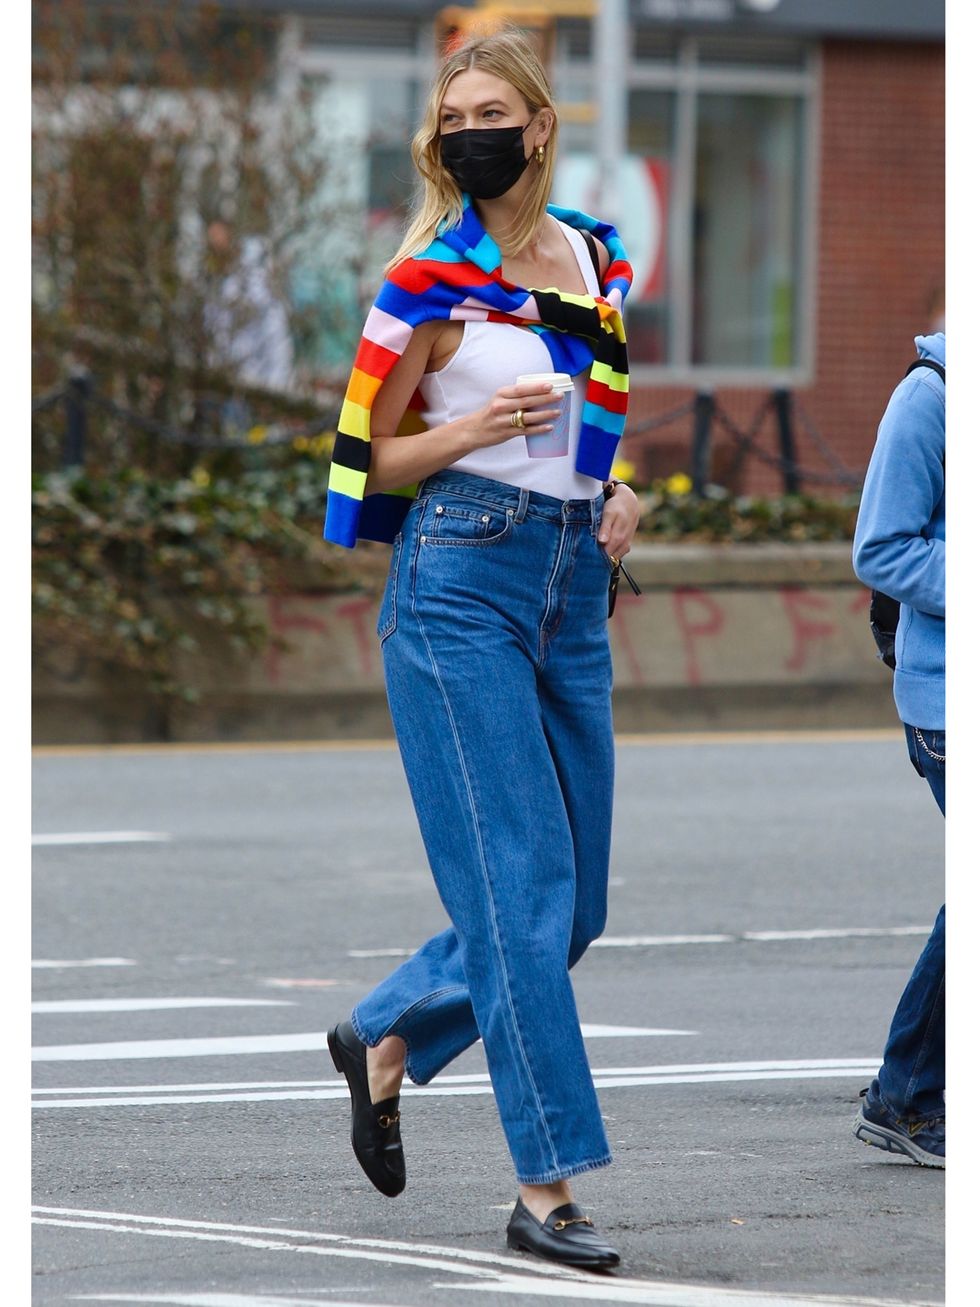 new york, ny    exclusive    karlie kloss wears a colorful sweater over her shoulders as she shows off her svelte post baby figure while out on a coffee run around manhattan’s downtown areapictured karlie klossbackgrid usa 9 april 2021 byline must read brosnyc  backgridusa 1 310 798 9111  usasalesbackgridcomuk 44 208 344 2007  uksalesbackgridcomuk clients   pictures containing childrenplease pixelate face prior to publication